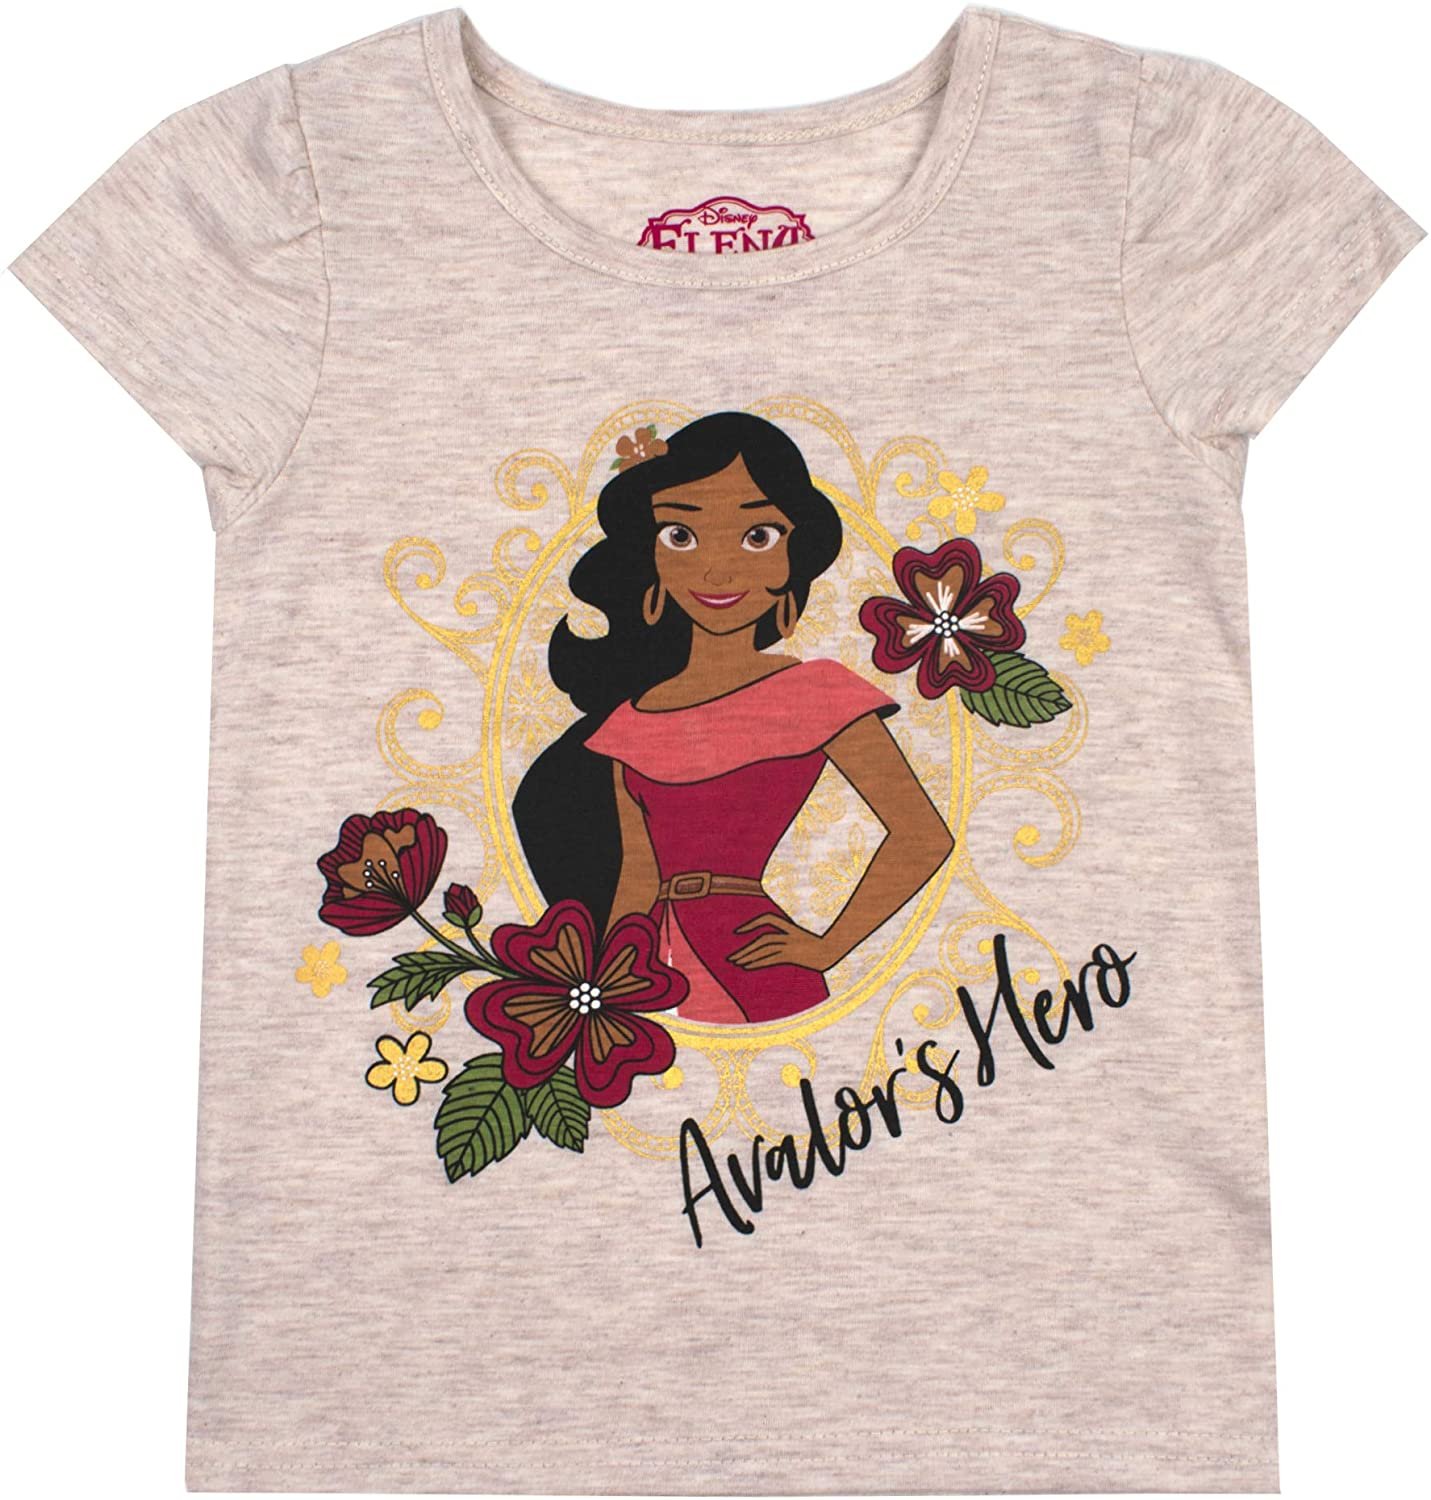 Disney Girls 3-Pack Short Sleeve T-Shirts, Casual Clothing for Toddlers and Kids - Elena of Avalor - image 4 of 4